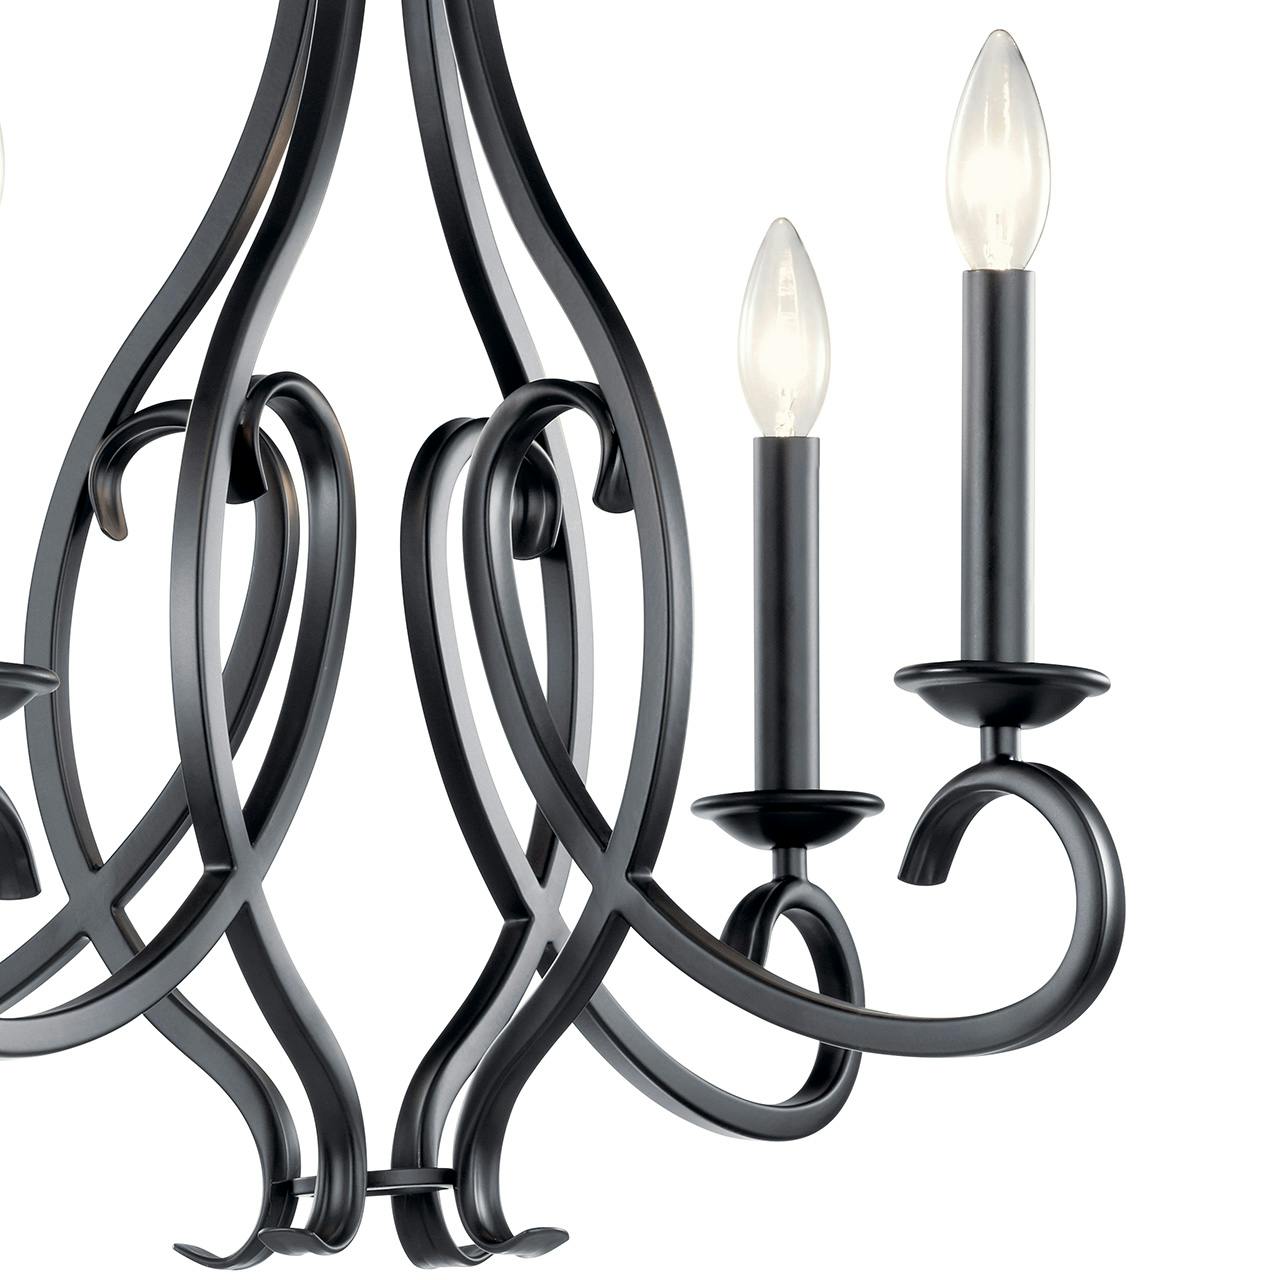 Close up view of the Ania 4 Light Chandelier in Black on a white background